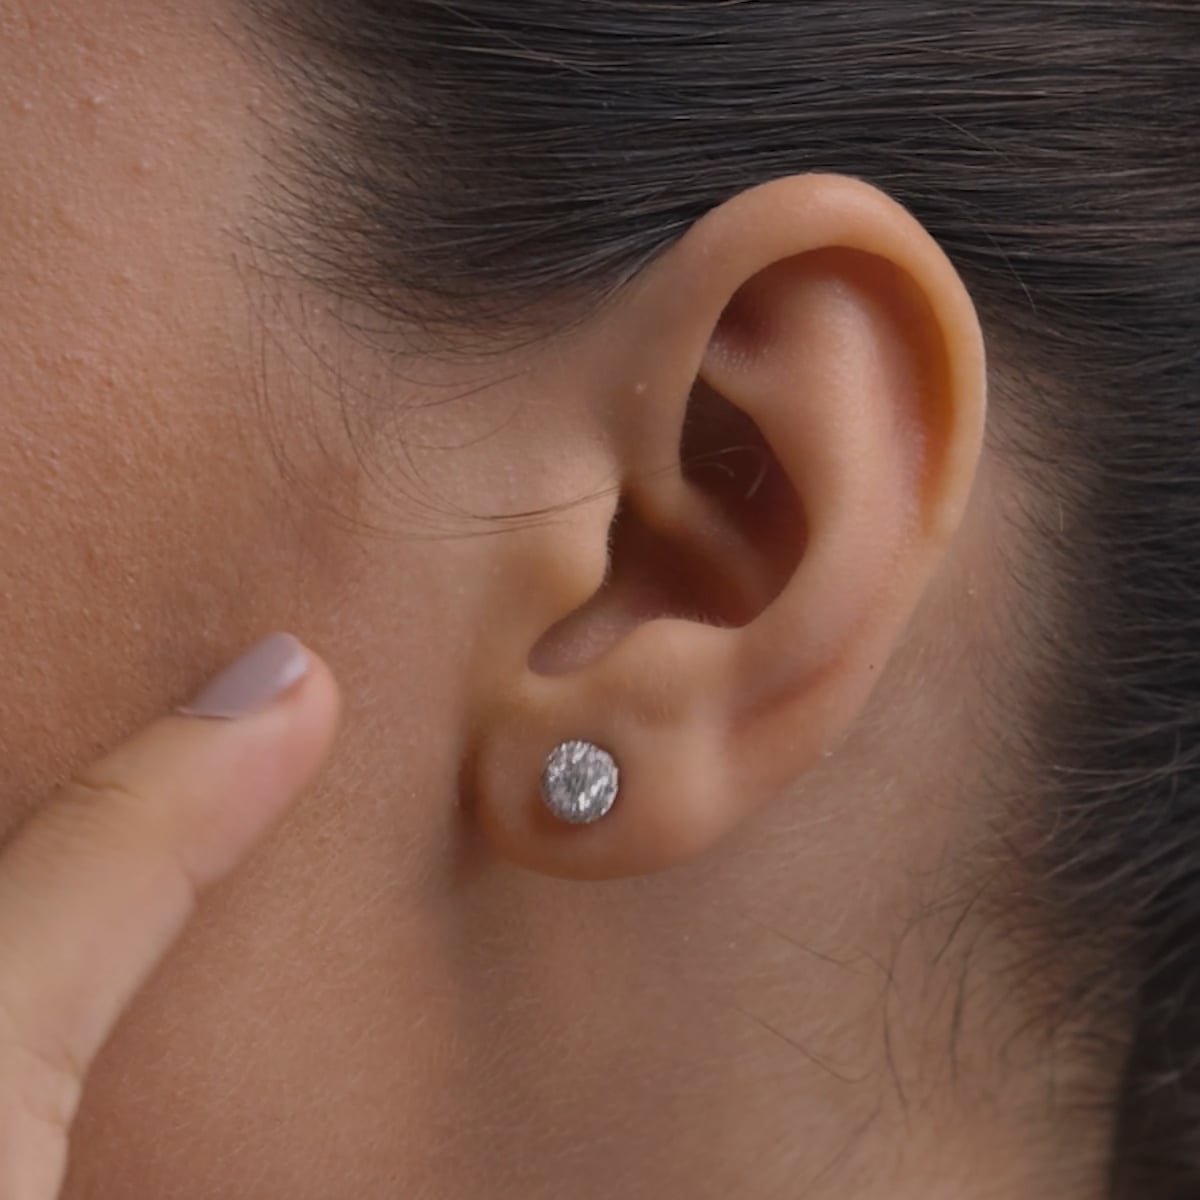 product video for 5/8 ctw Round Lab Grown Diamond Halo Stud Earrings